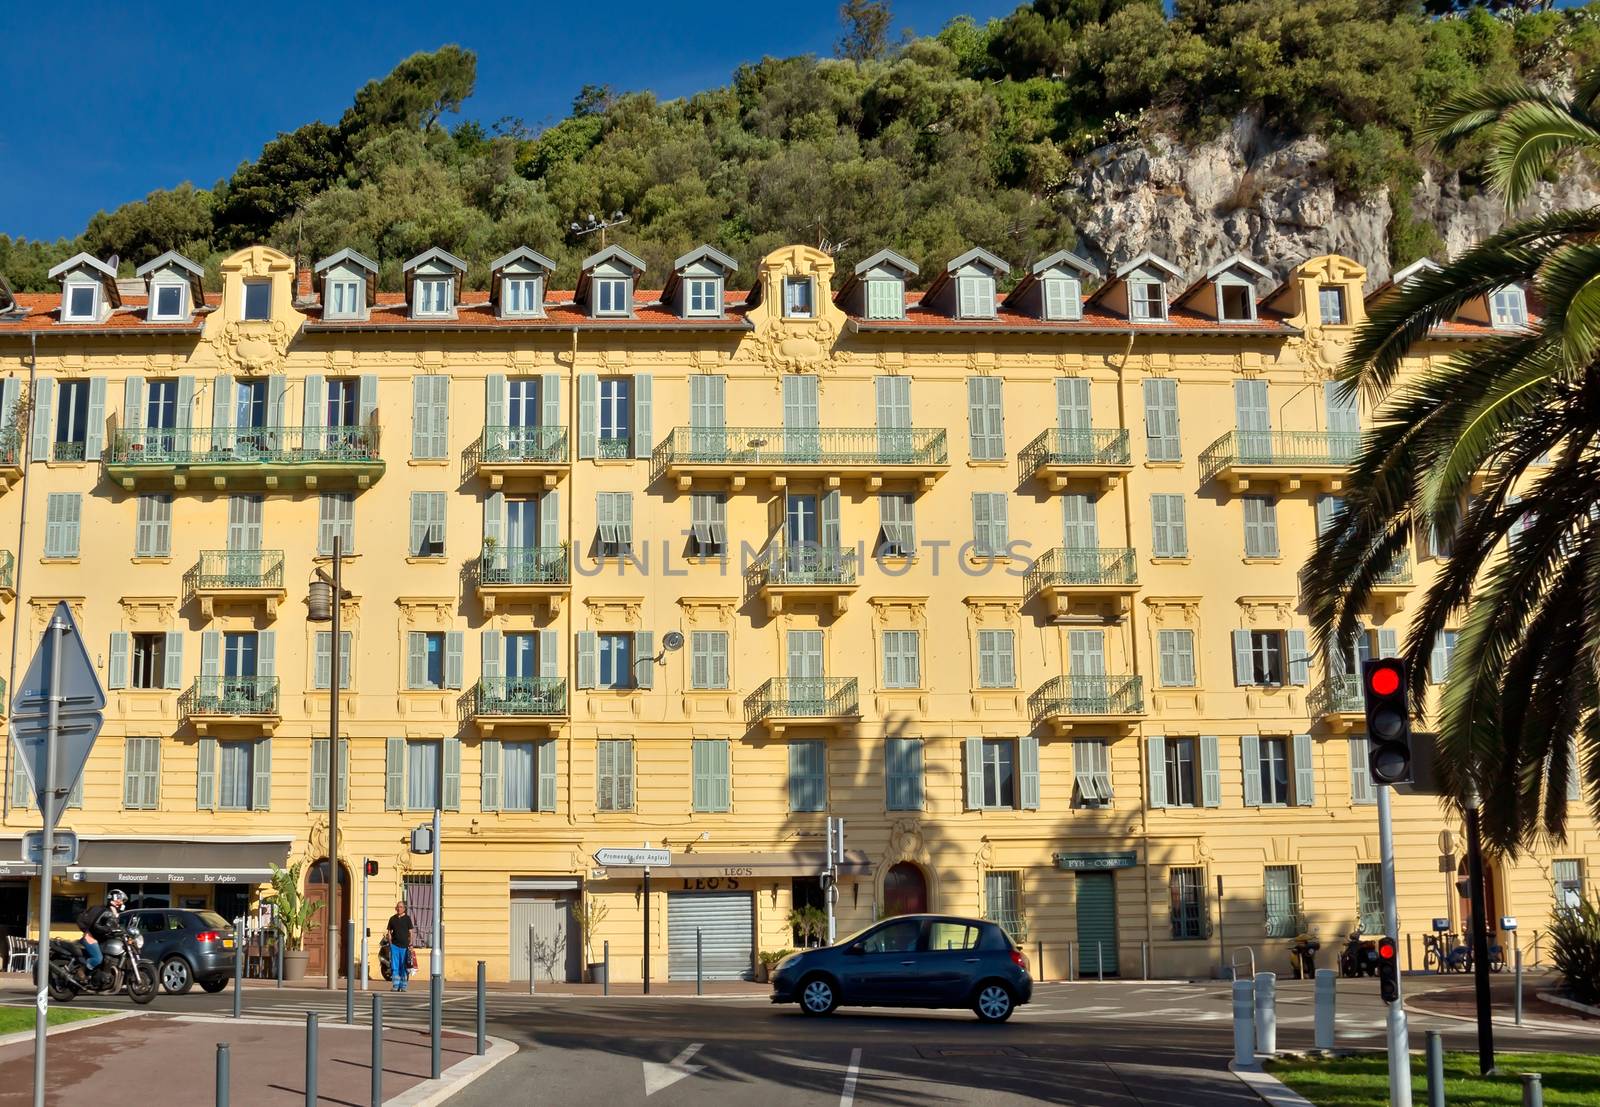 NICE, FRANCE - JUNE 5, 2014: Architecture along Promenade des Anglais. Promenade des Anglais is a symbol of the Cote d'Azur and was built in 1830 at the expense of the British colony.

Nice, France - June 5, 2014: Architecture along Promenade des Anglais. Promenade des Anglais is a symbol of the Cote d'Azur and was built in 1830 at the expense of the British colony. People are walking by street.